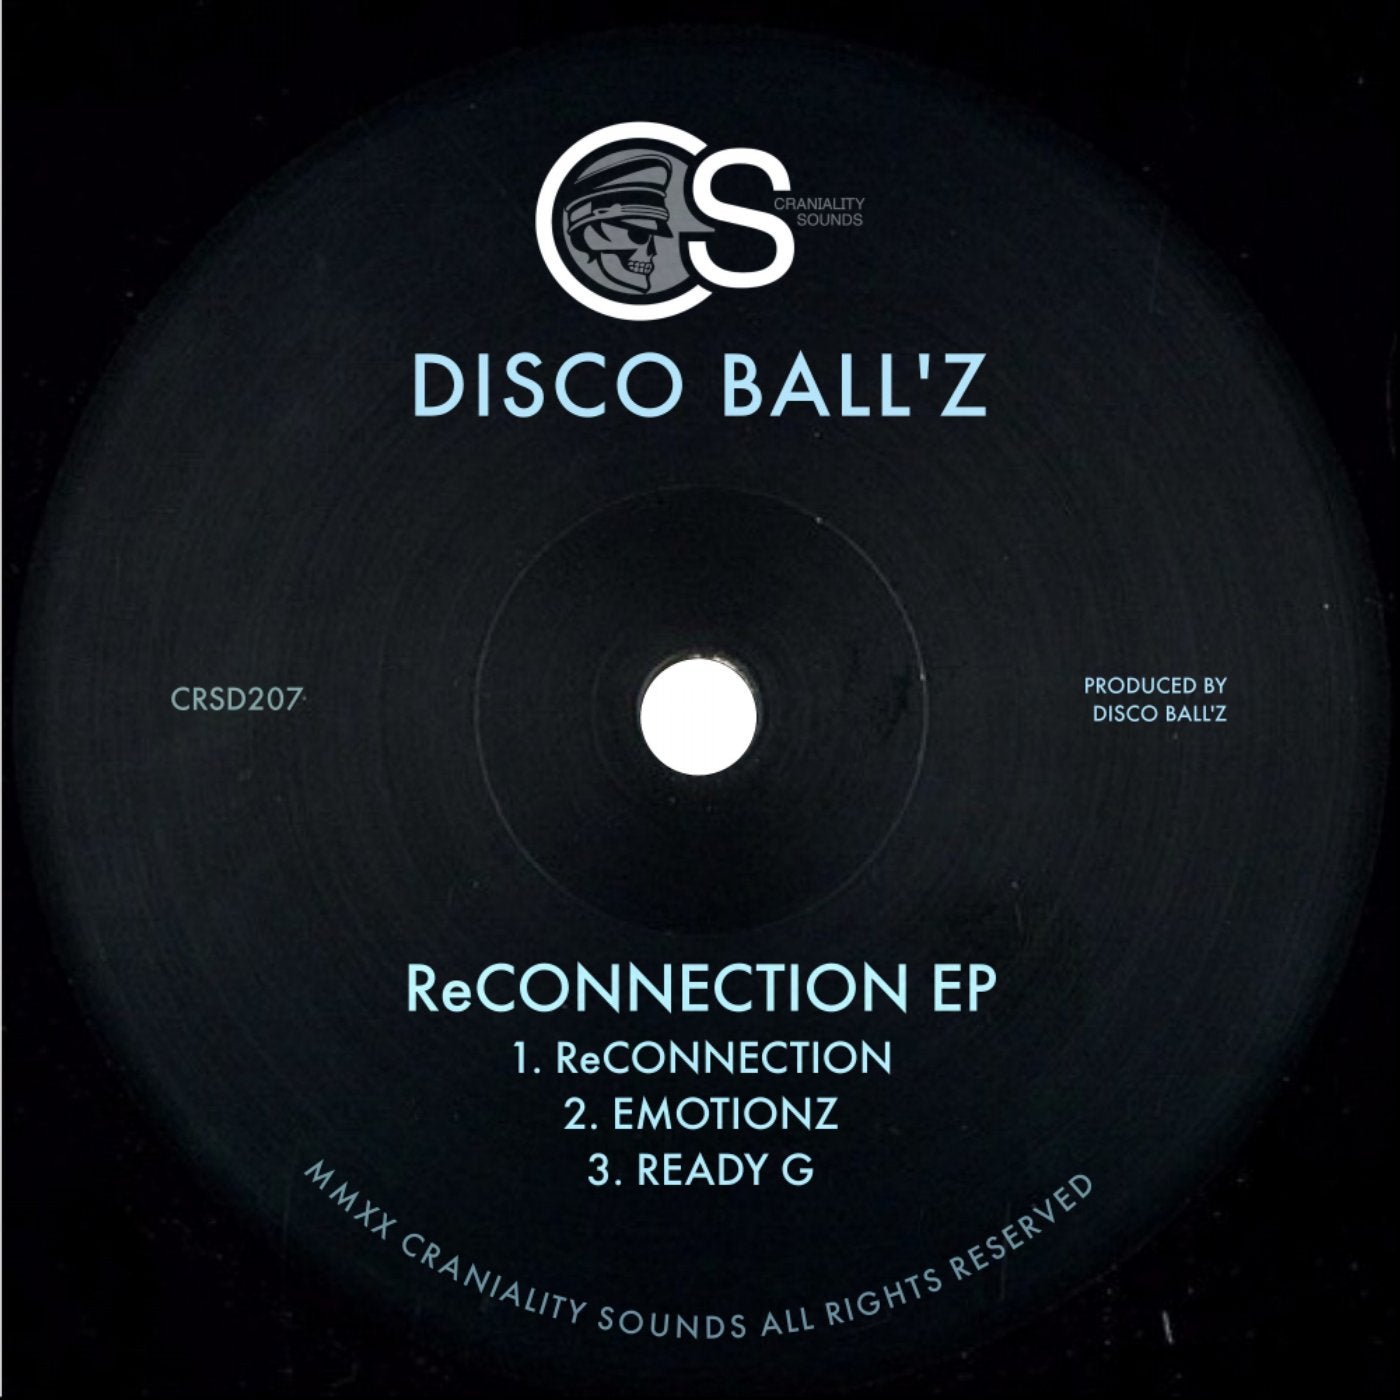 ReConnection EP